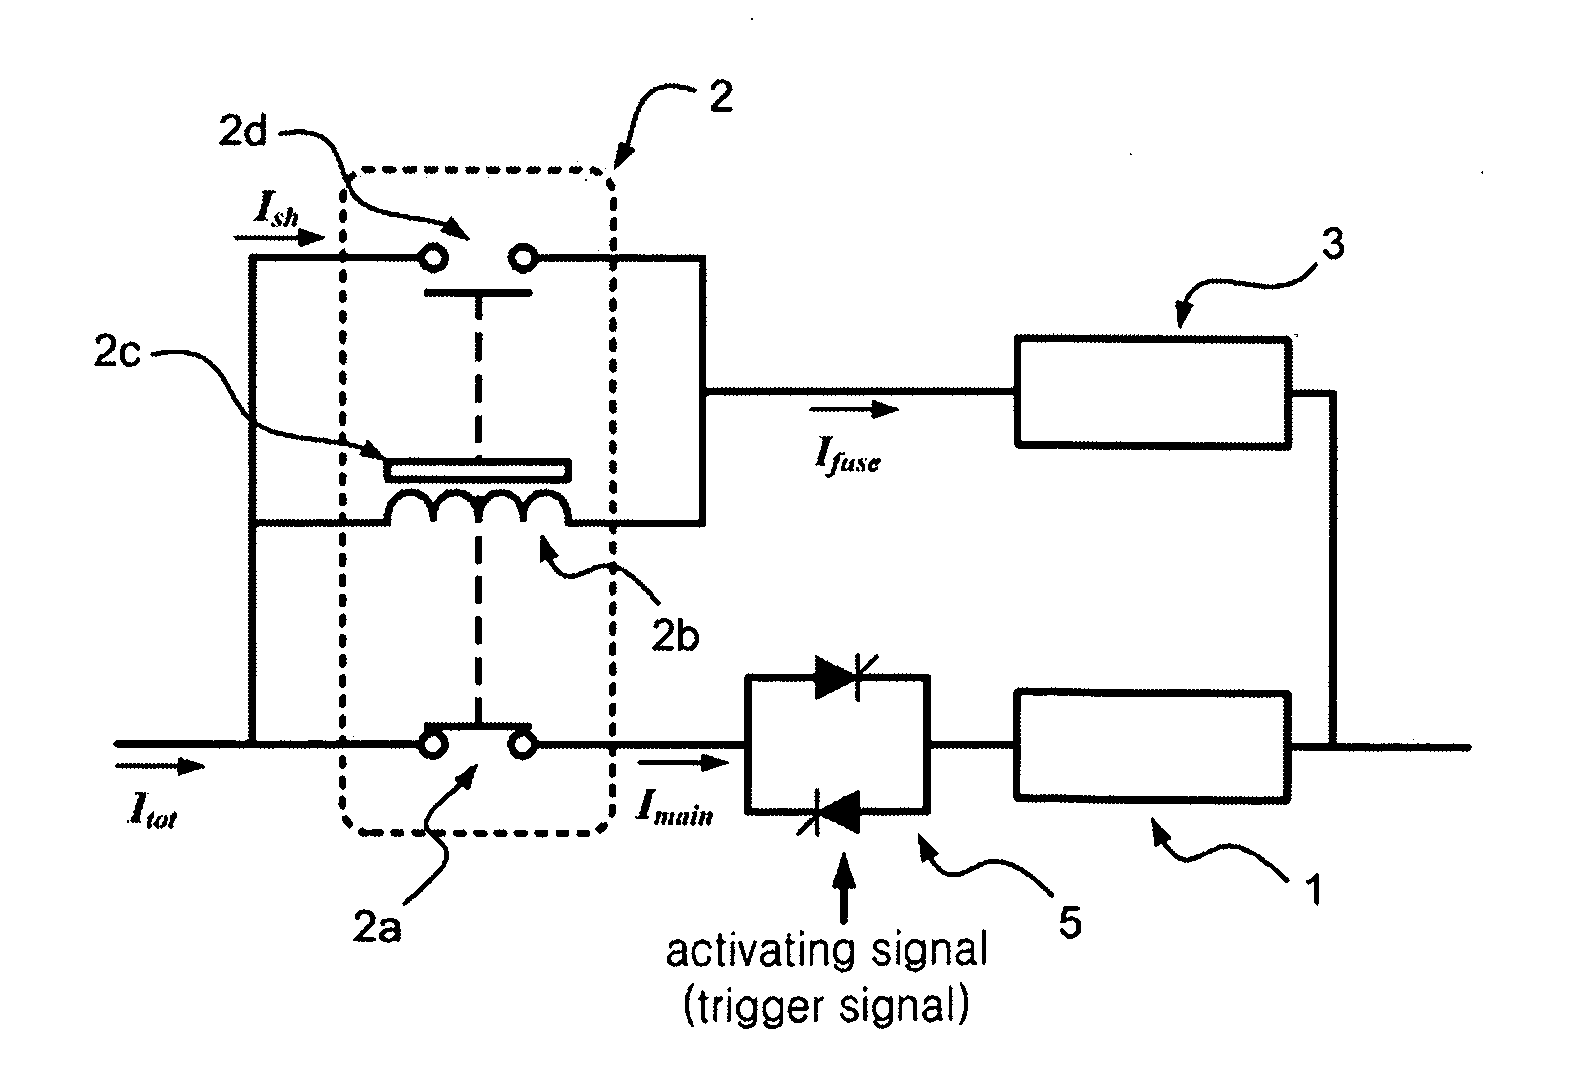 Hybrid-type superconducting fault current limiter